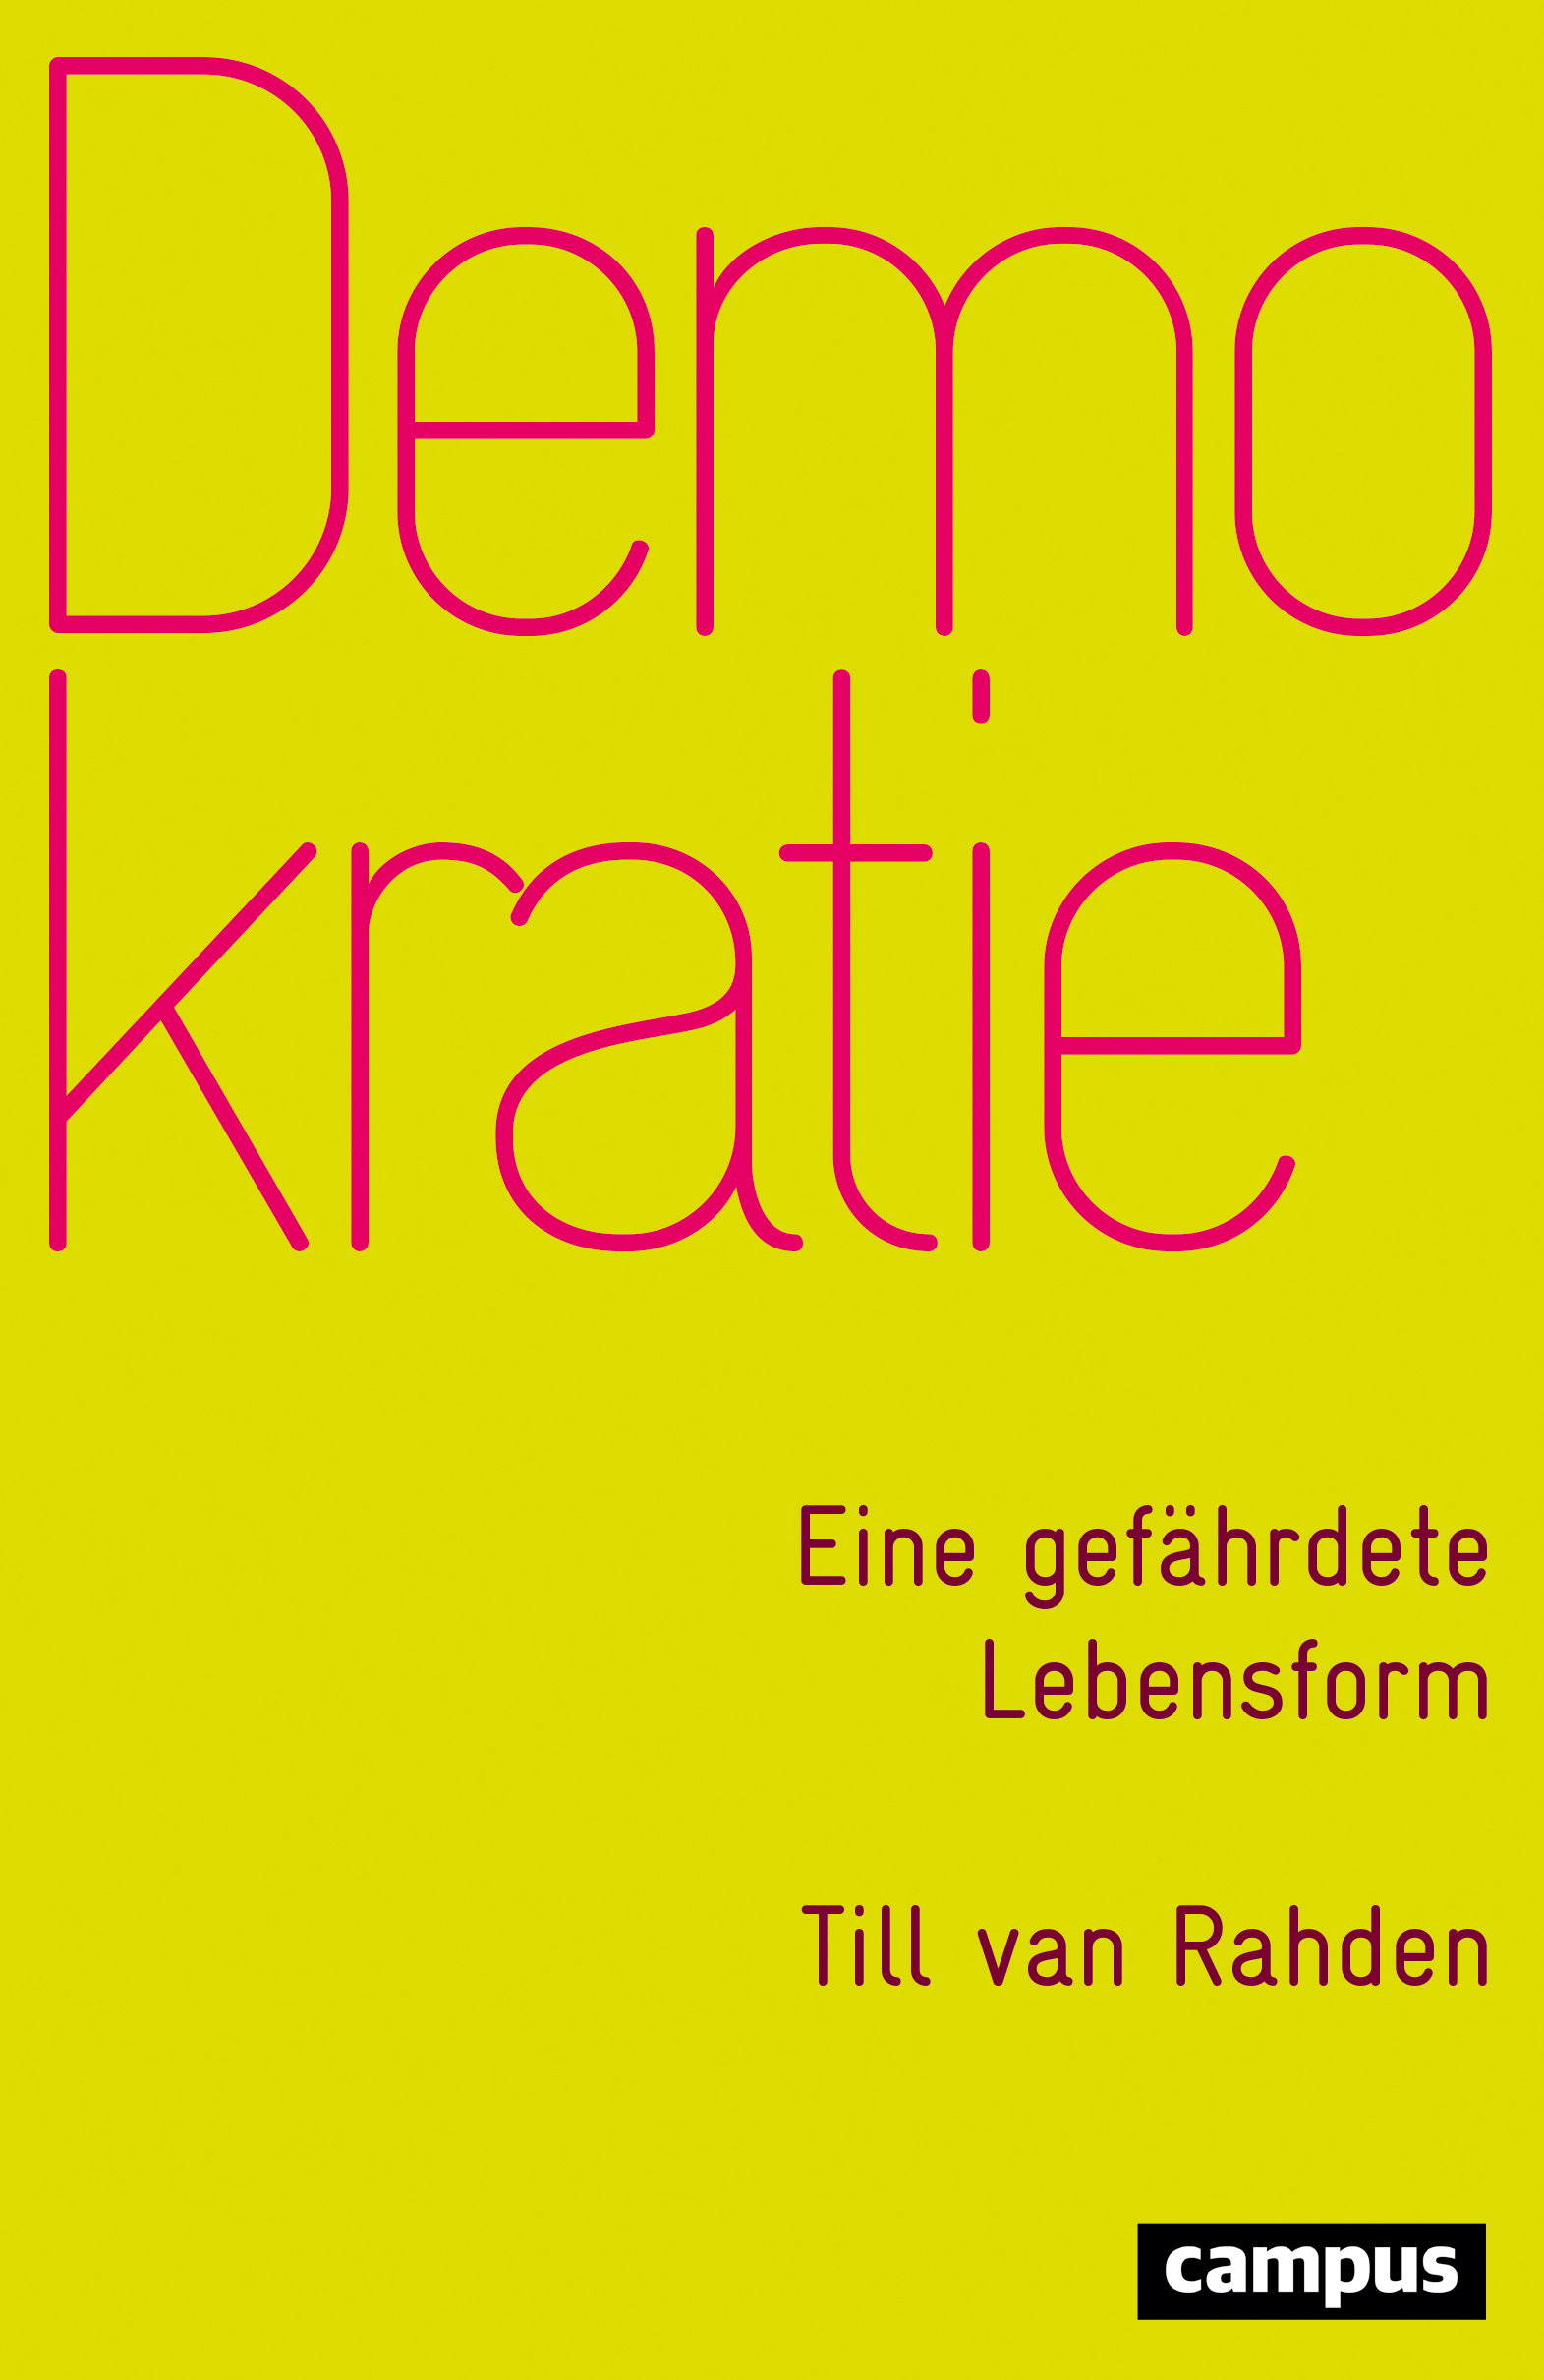 Demokratie Til can Raheden book cover - yellow 